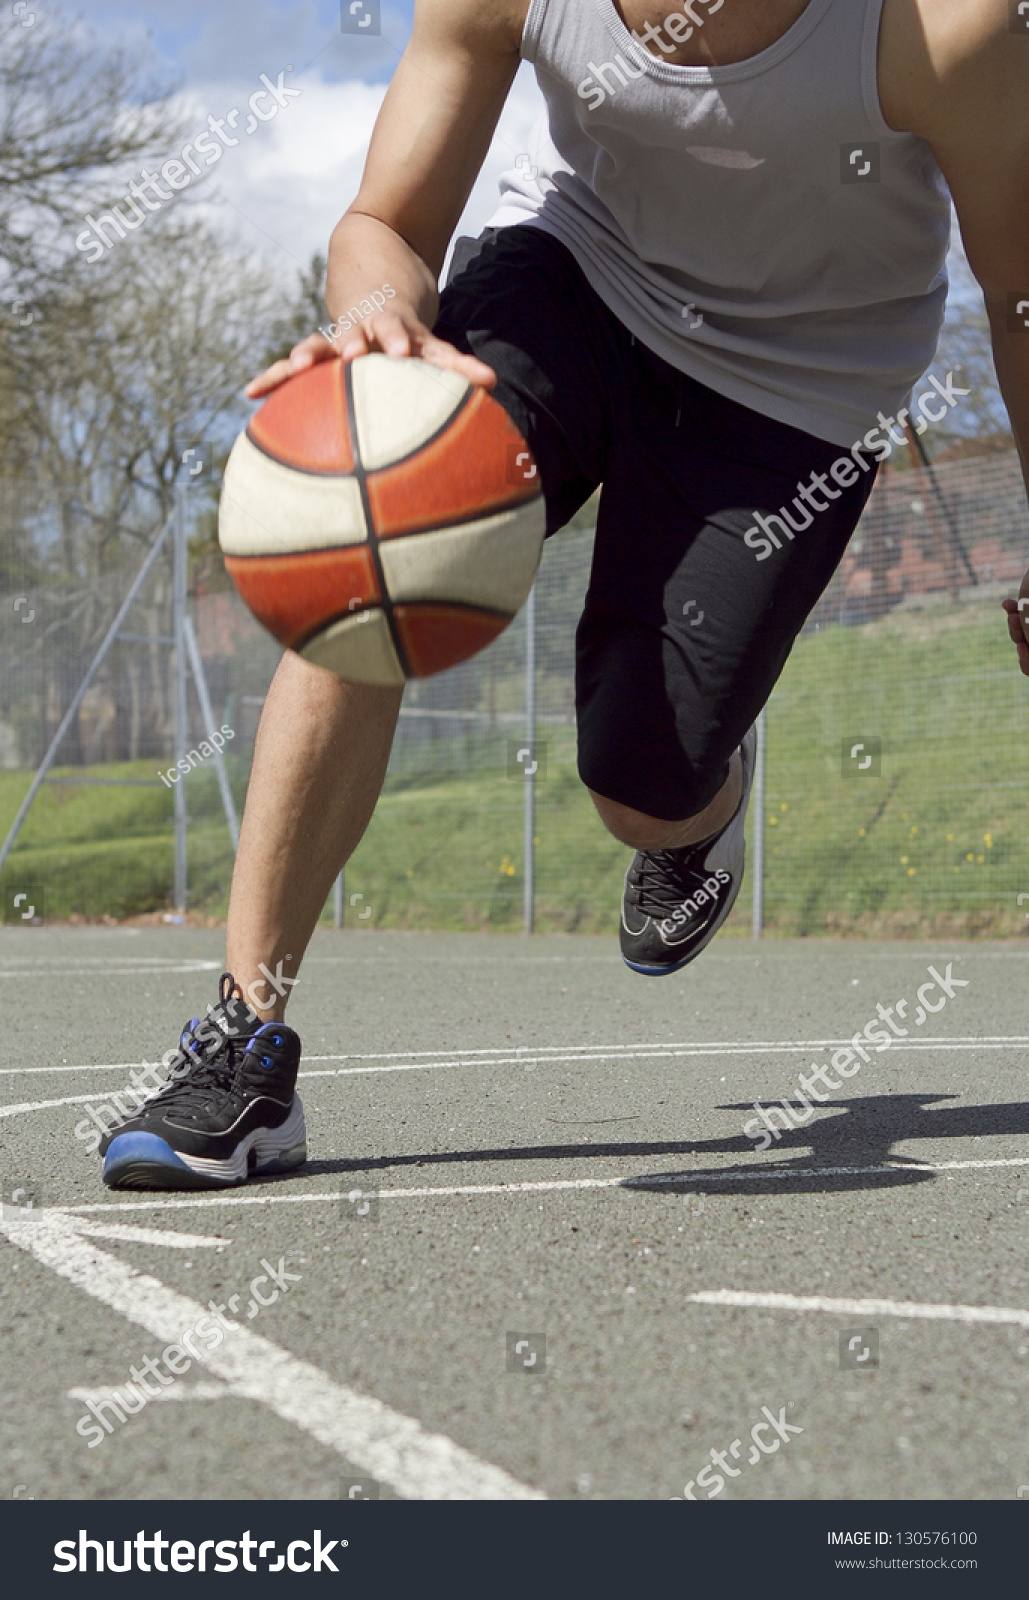 Portrait of Basketball Player dribbling the ball in Motion #130576100